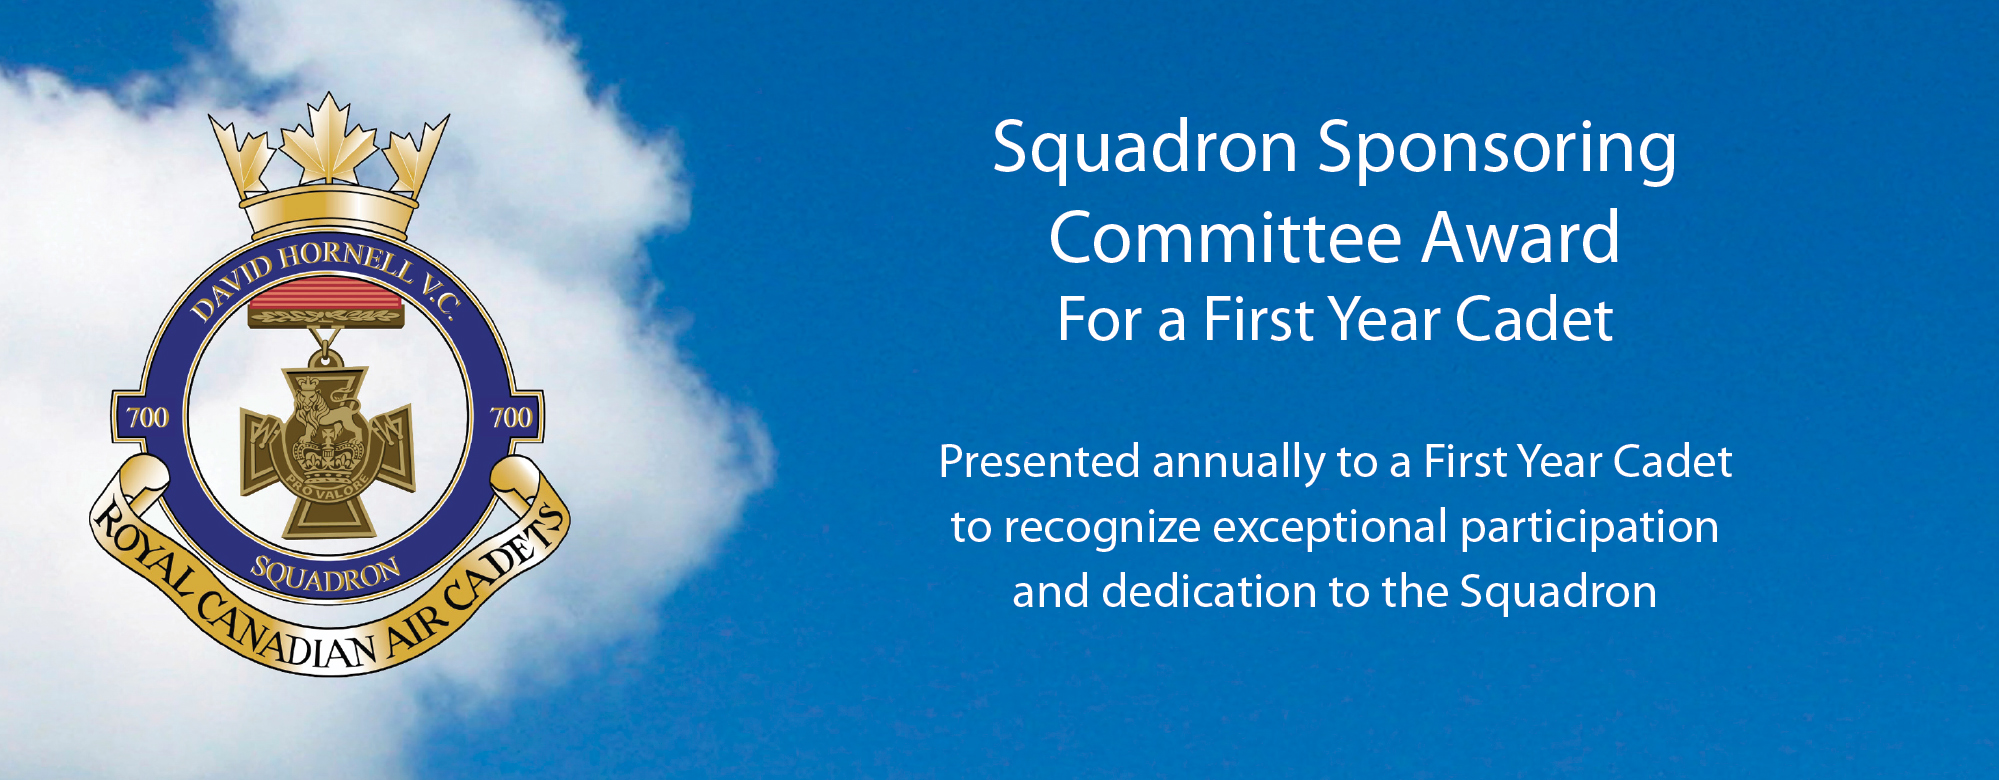 Squadron Sponsoring Committee Award For a First Year Cadet Presented annually to a First Year Cadet to recognize exceptional participation and dedication to the Squadron